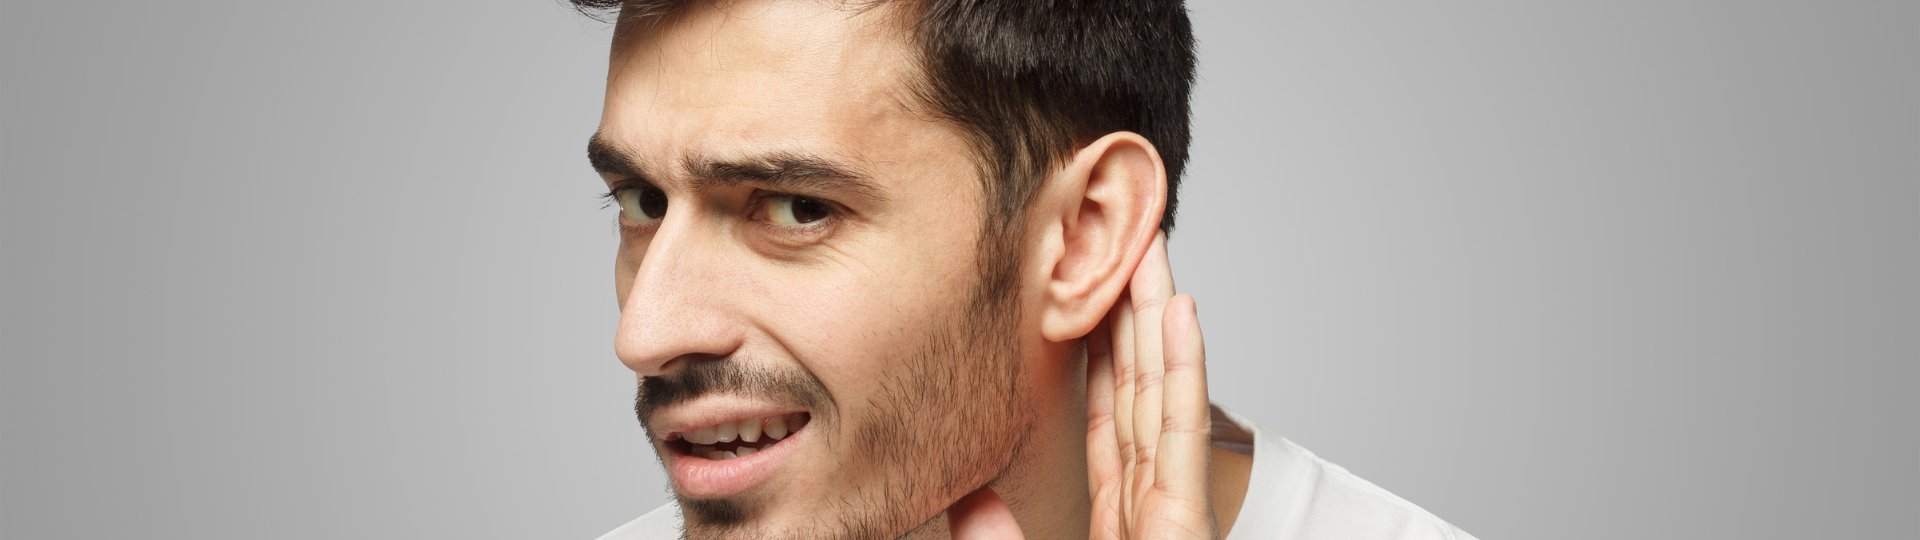 a masculine person holding his hand up to his ear because he has suddenly lost his hearing